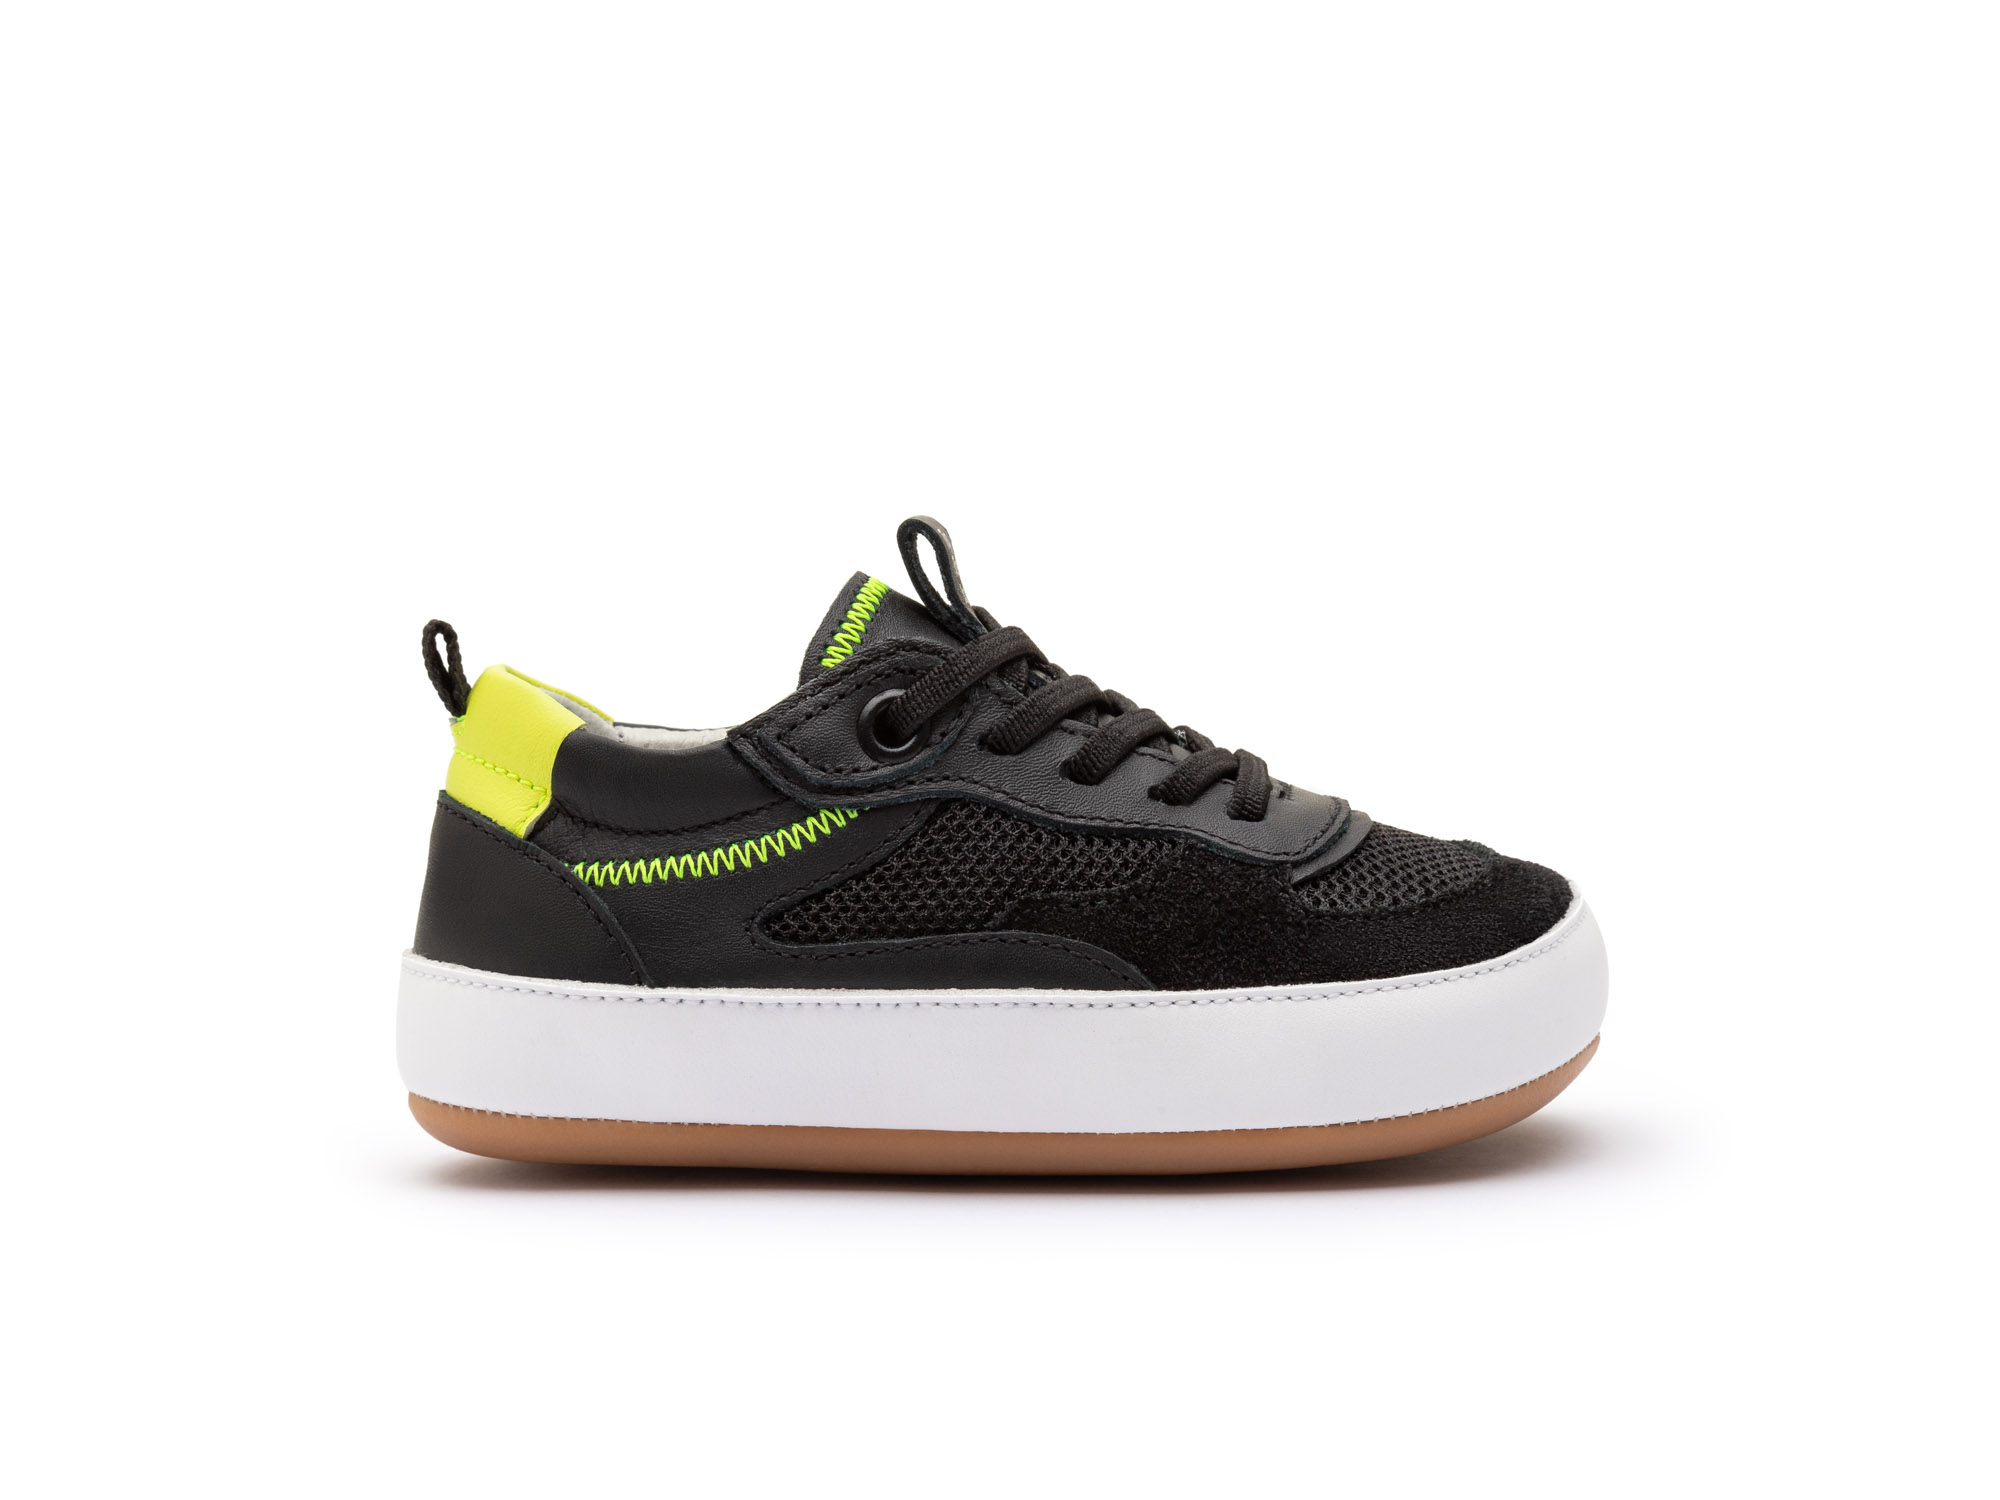 UP & GO Sneakers for Boys Step | Tip Toey Joey - Australia - 4